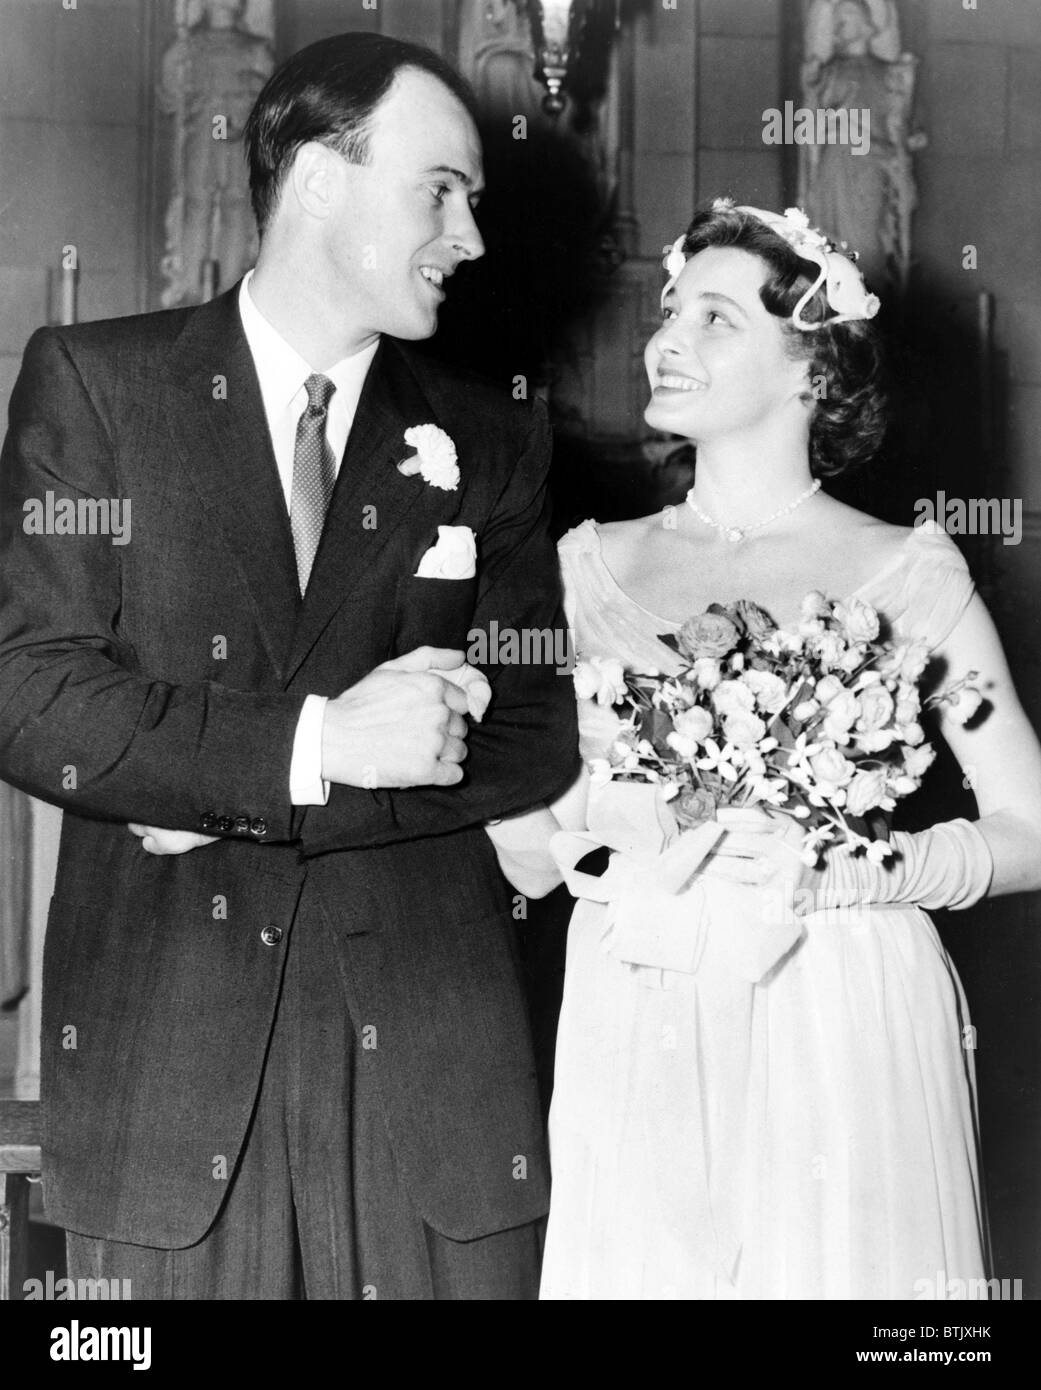 Patricia Neal (b. 1926) and Roald Dahl (1916-1990), smiling at each after their wedding in 1953. Stock Photo